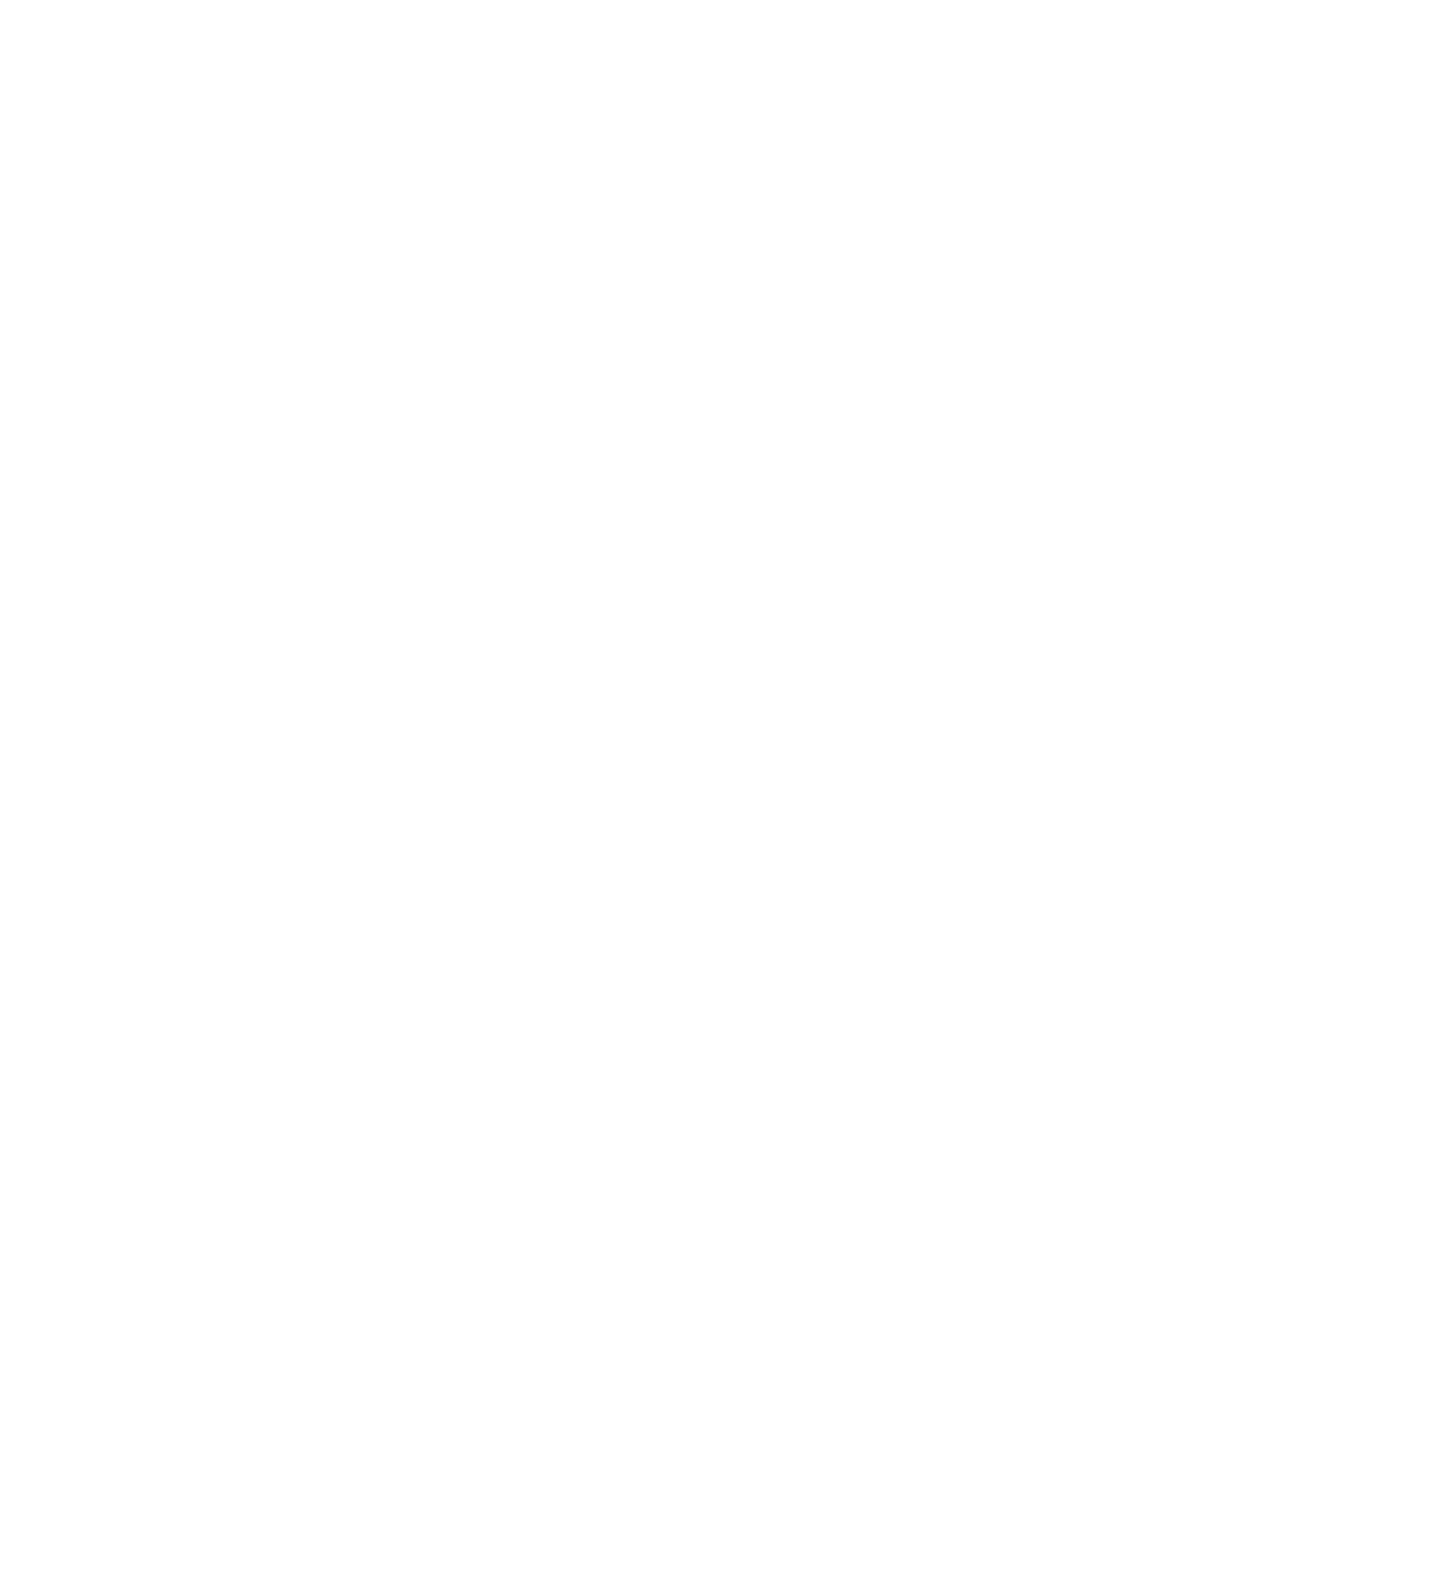 Carlyle Group logo for dark backgrounds (transparent PNG)